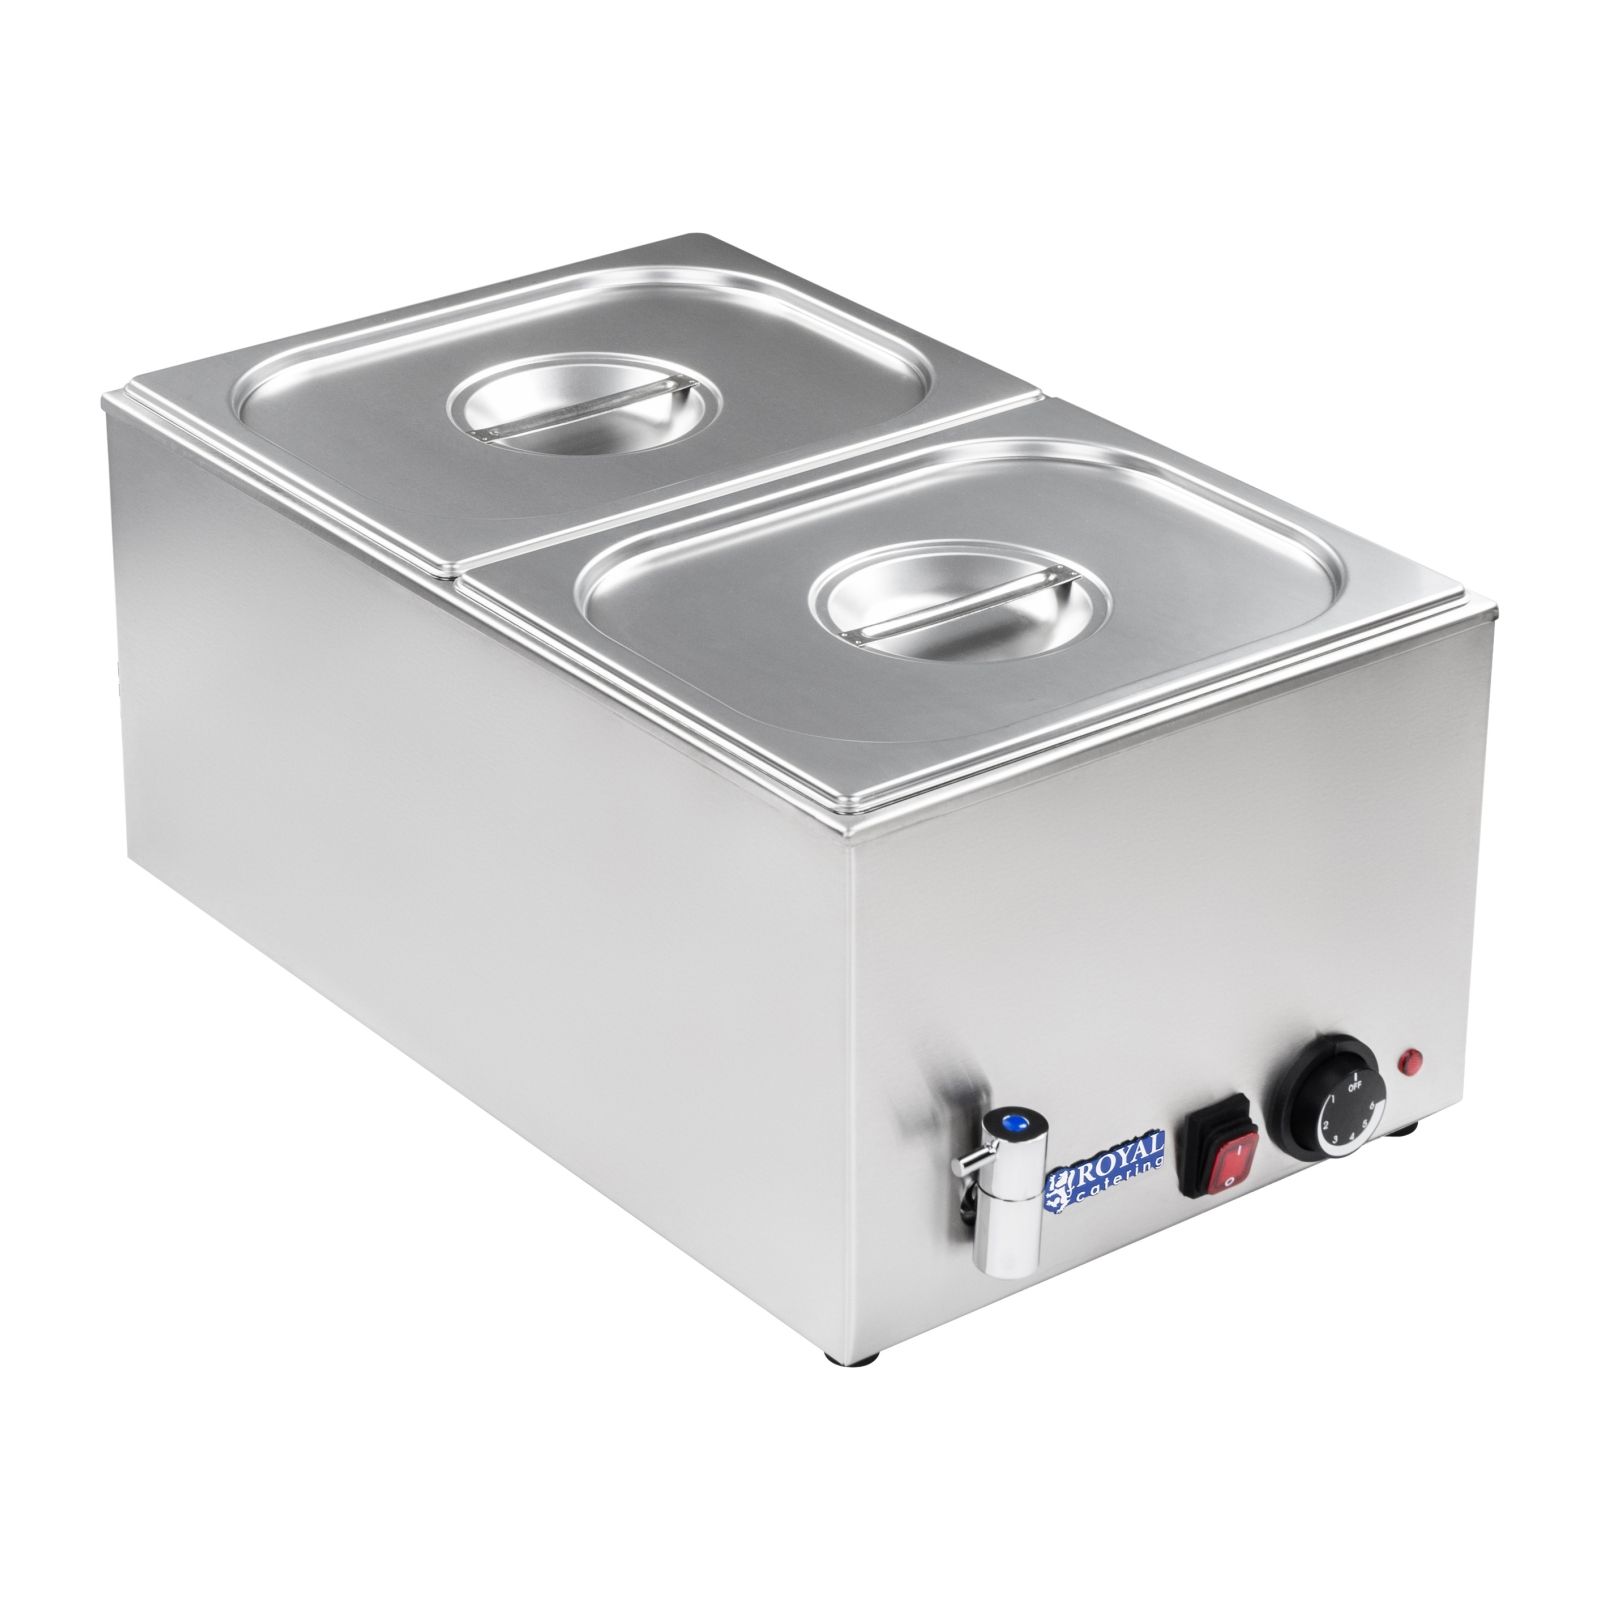 Royal Catering Bain-marie - GN container - 1/2 - drain tap RCBM-1/2-150A-GN